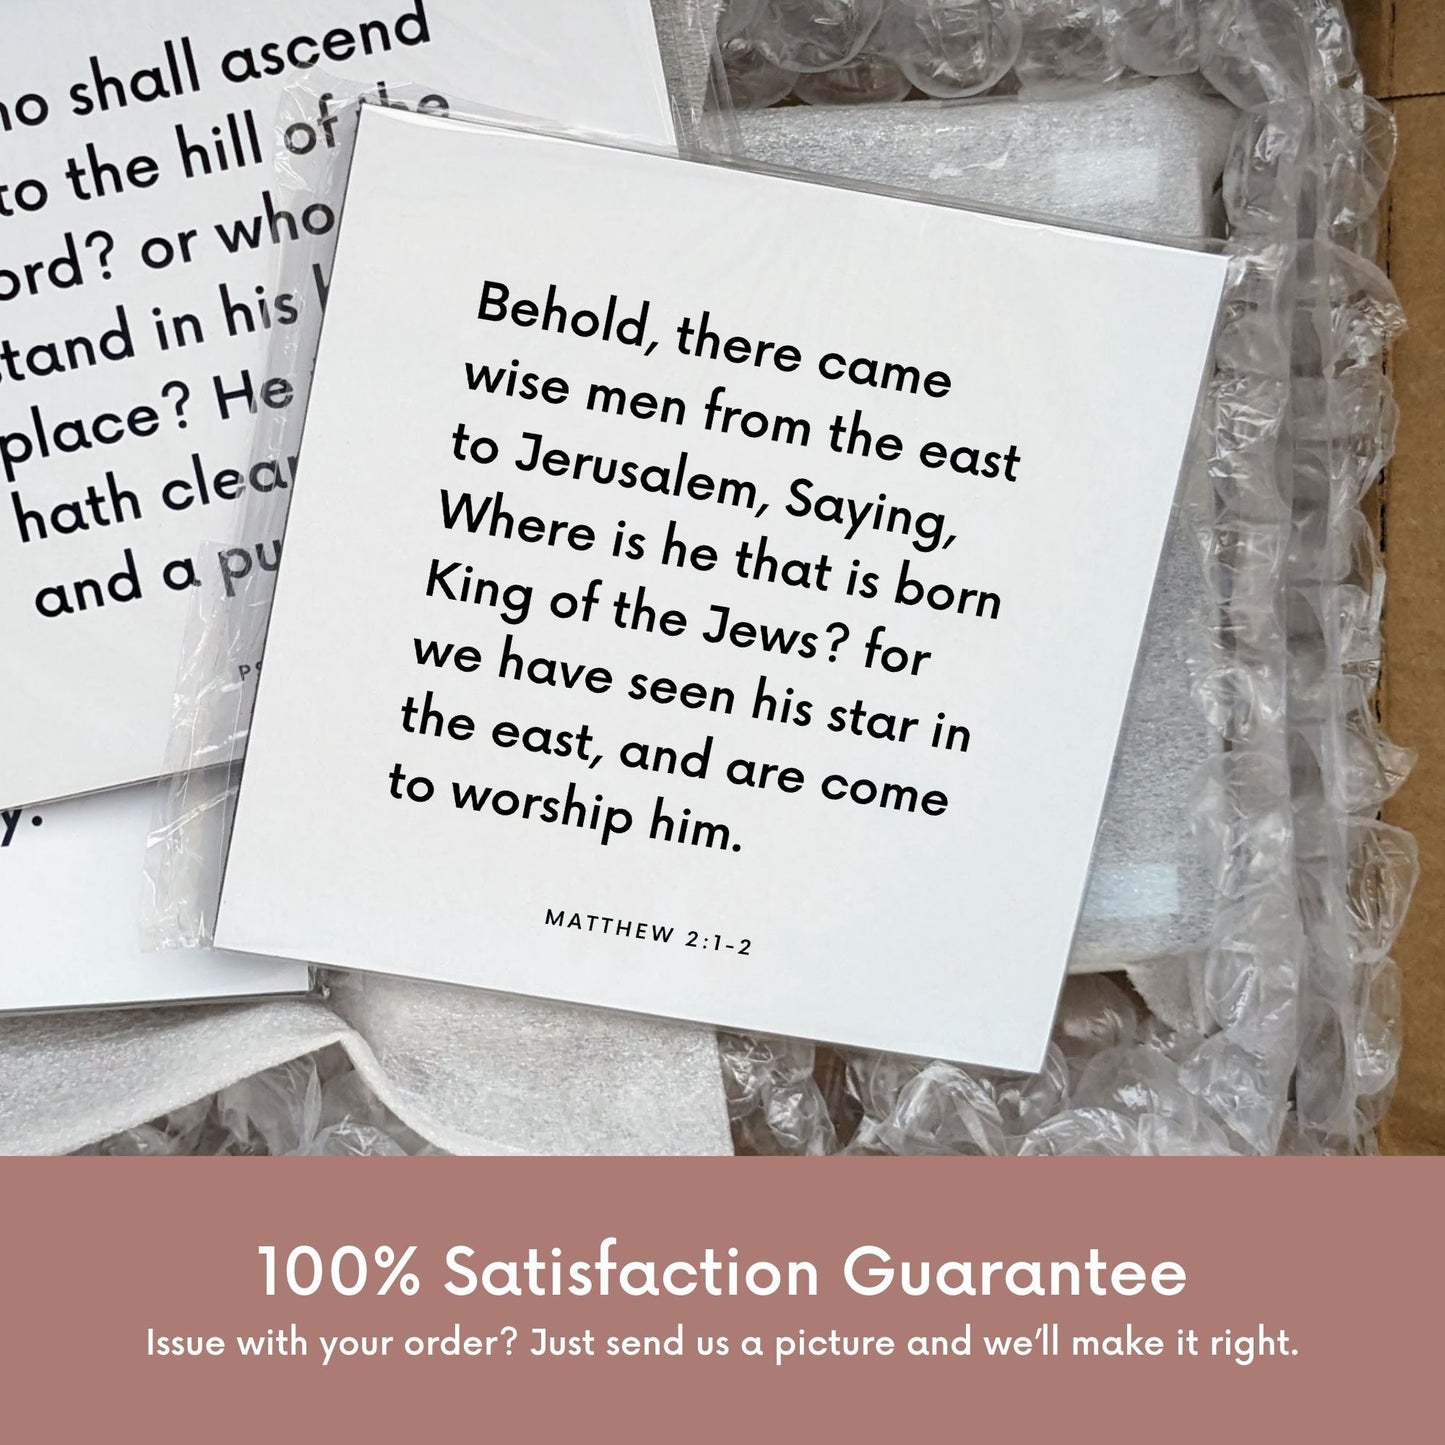 Shipping materials for scripture tile of Matthew 2:1-2 - "We have seen his star, and are come to worship him"